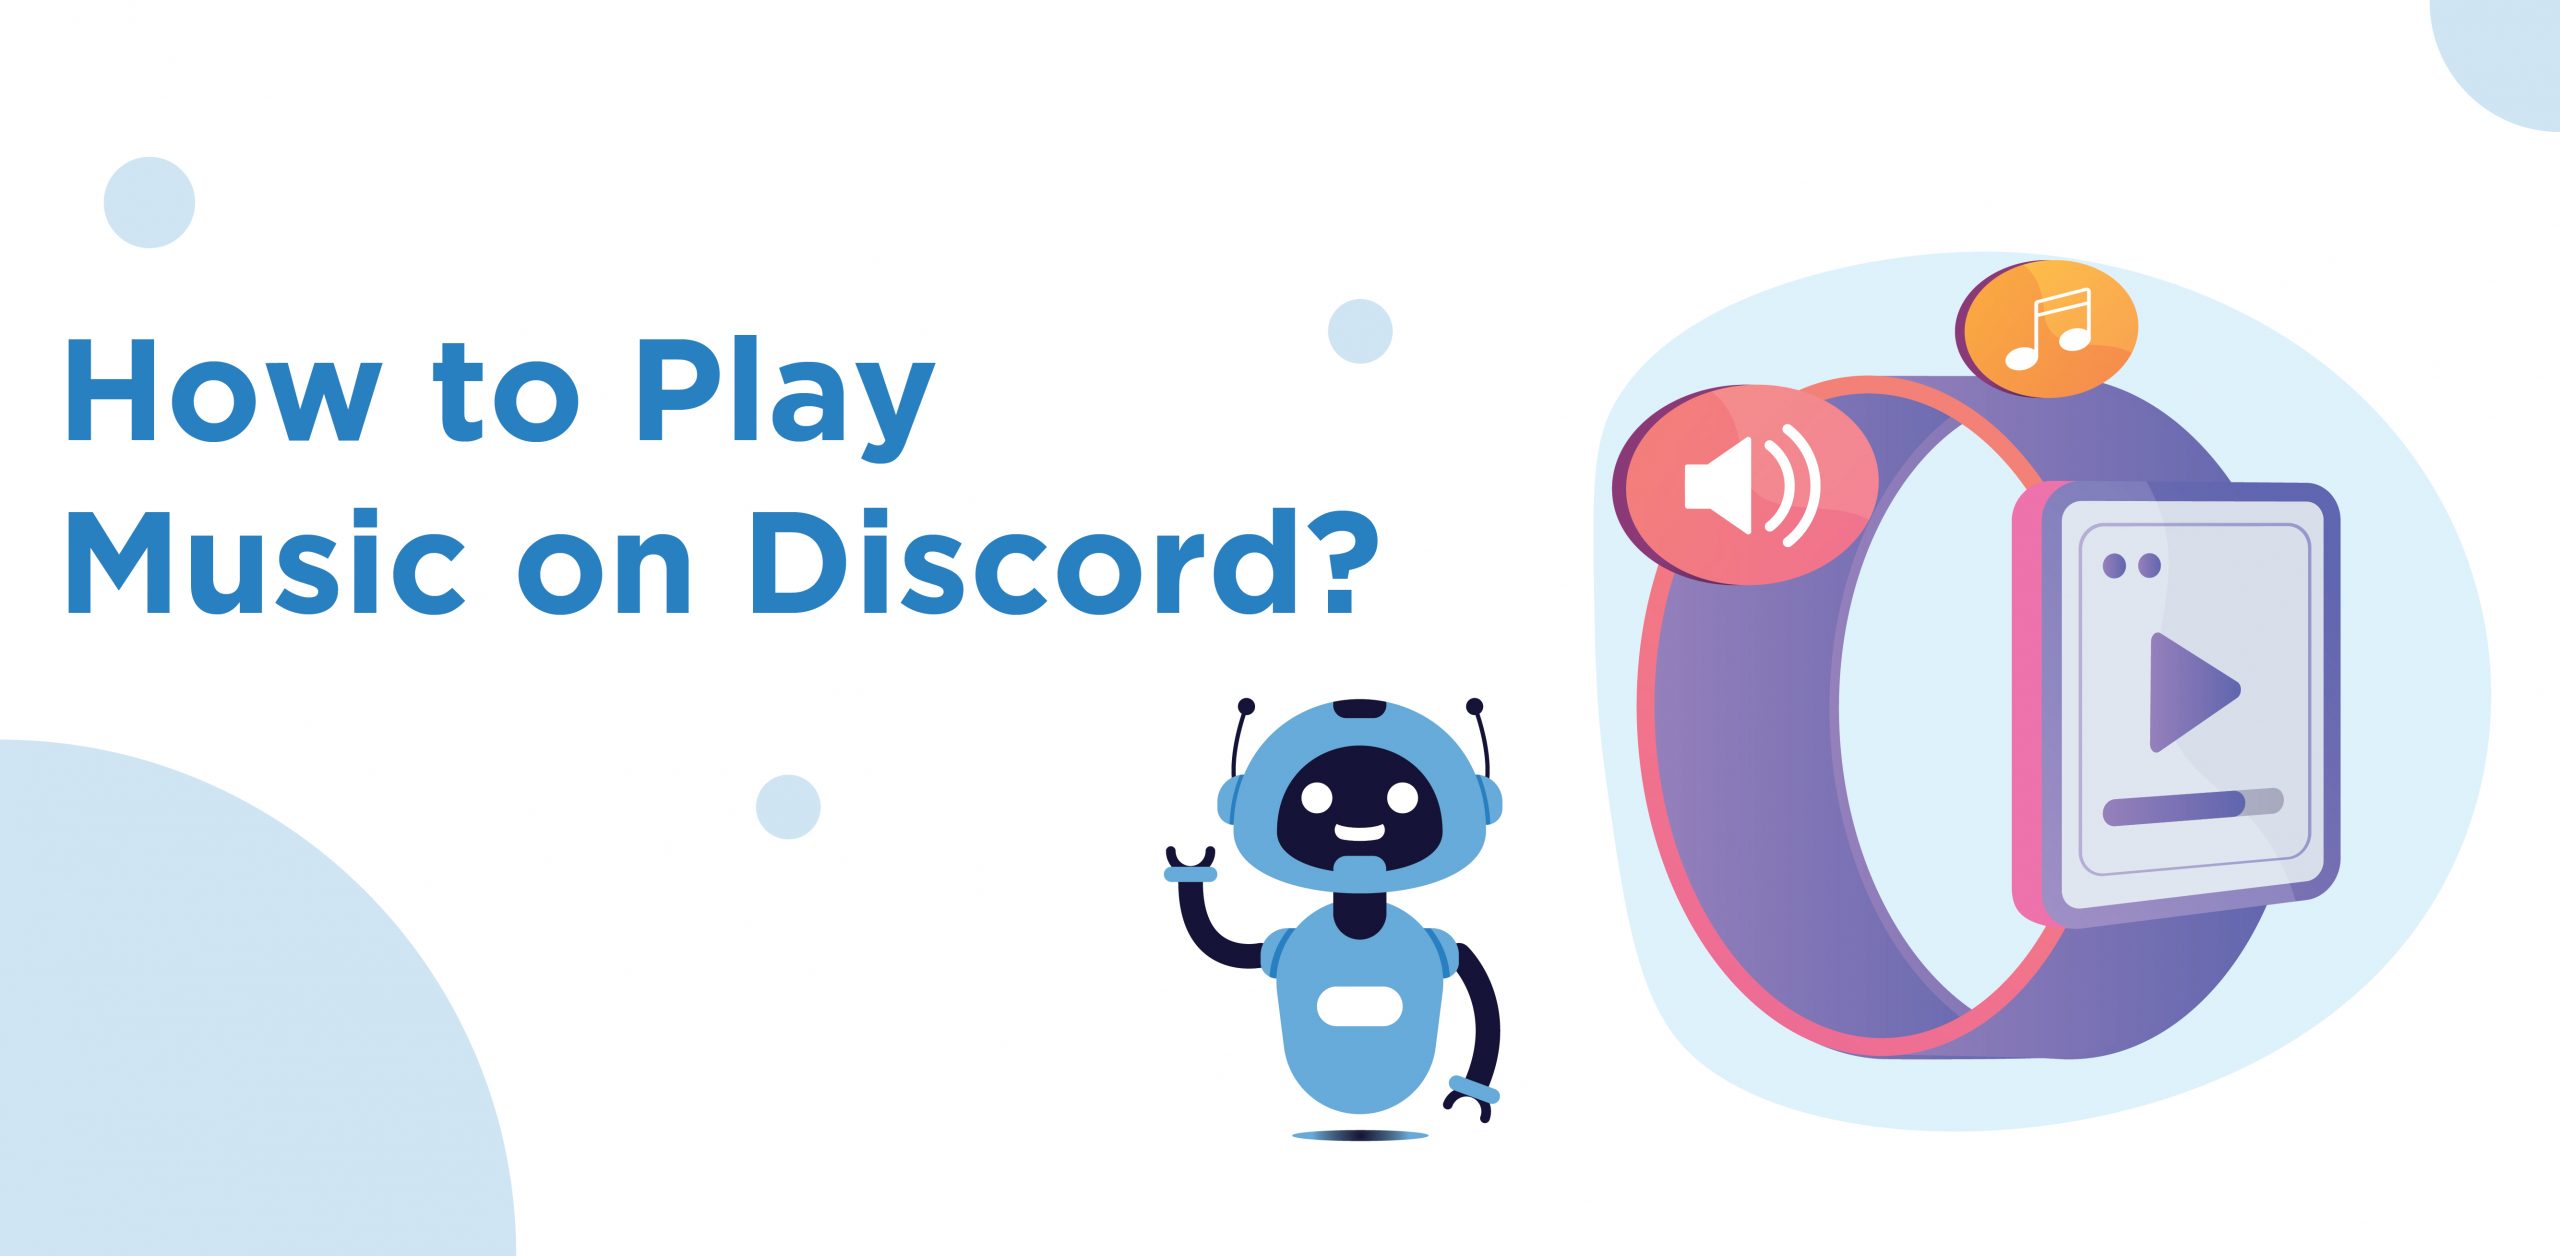 How to Play Music on Discord?